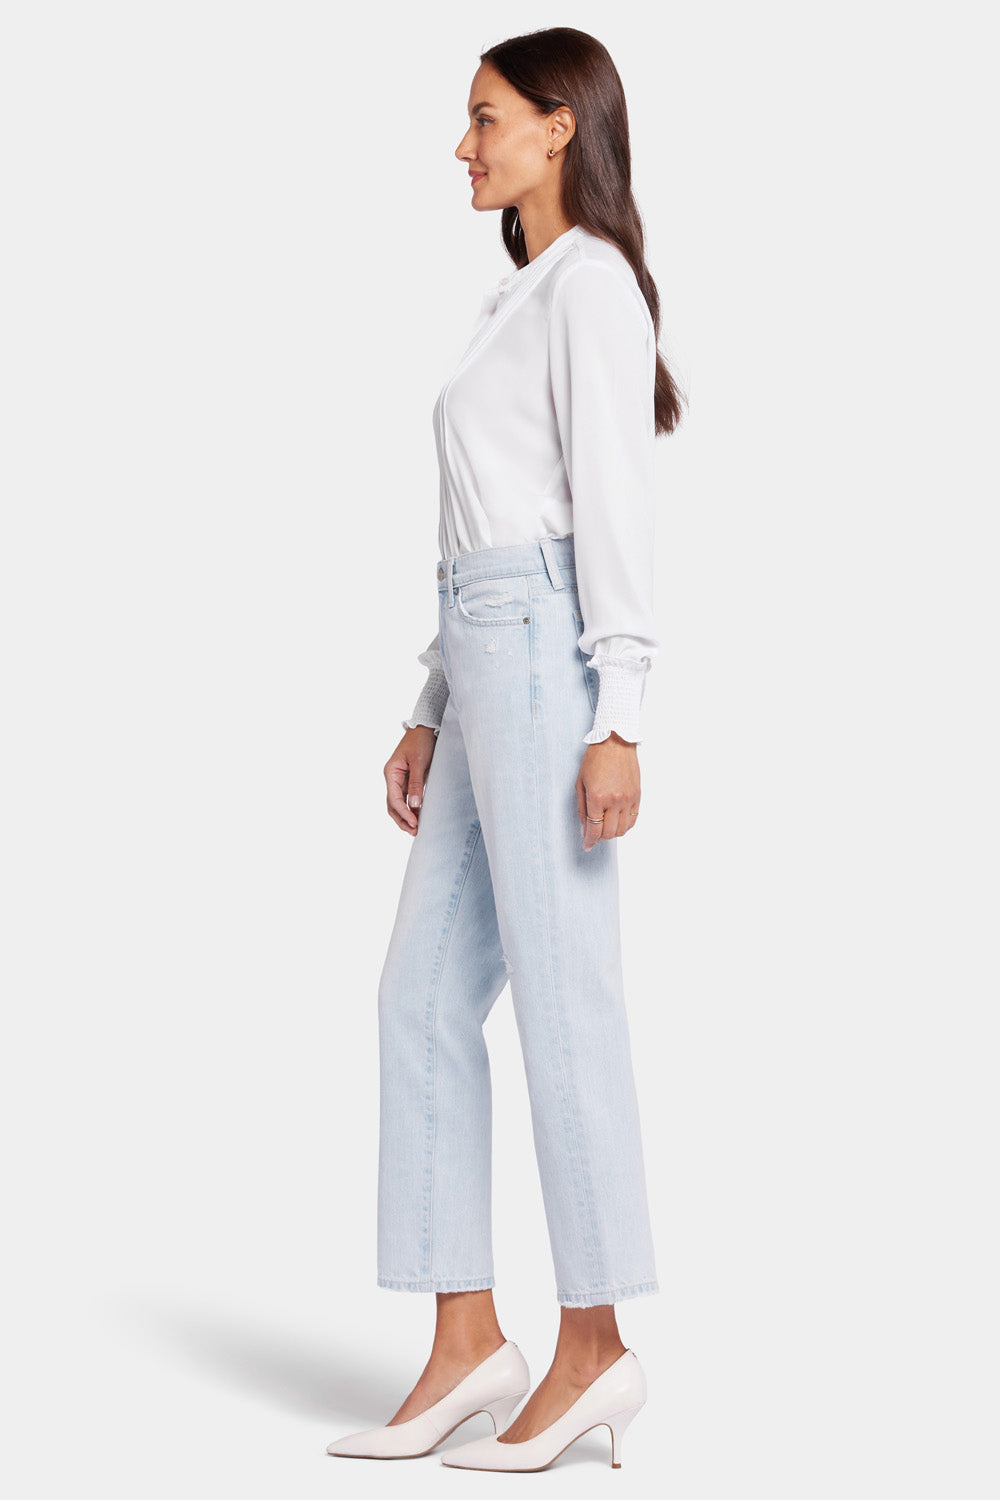 NYDJ Charlotte Relaxed Jeans In Rigid Denim With Super High Rise - London Eye